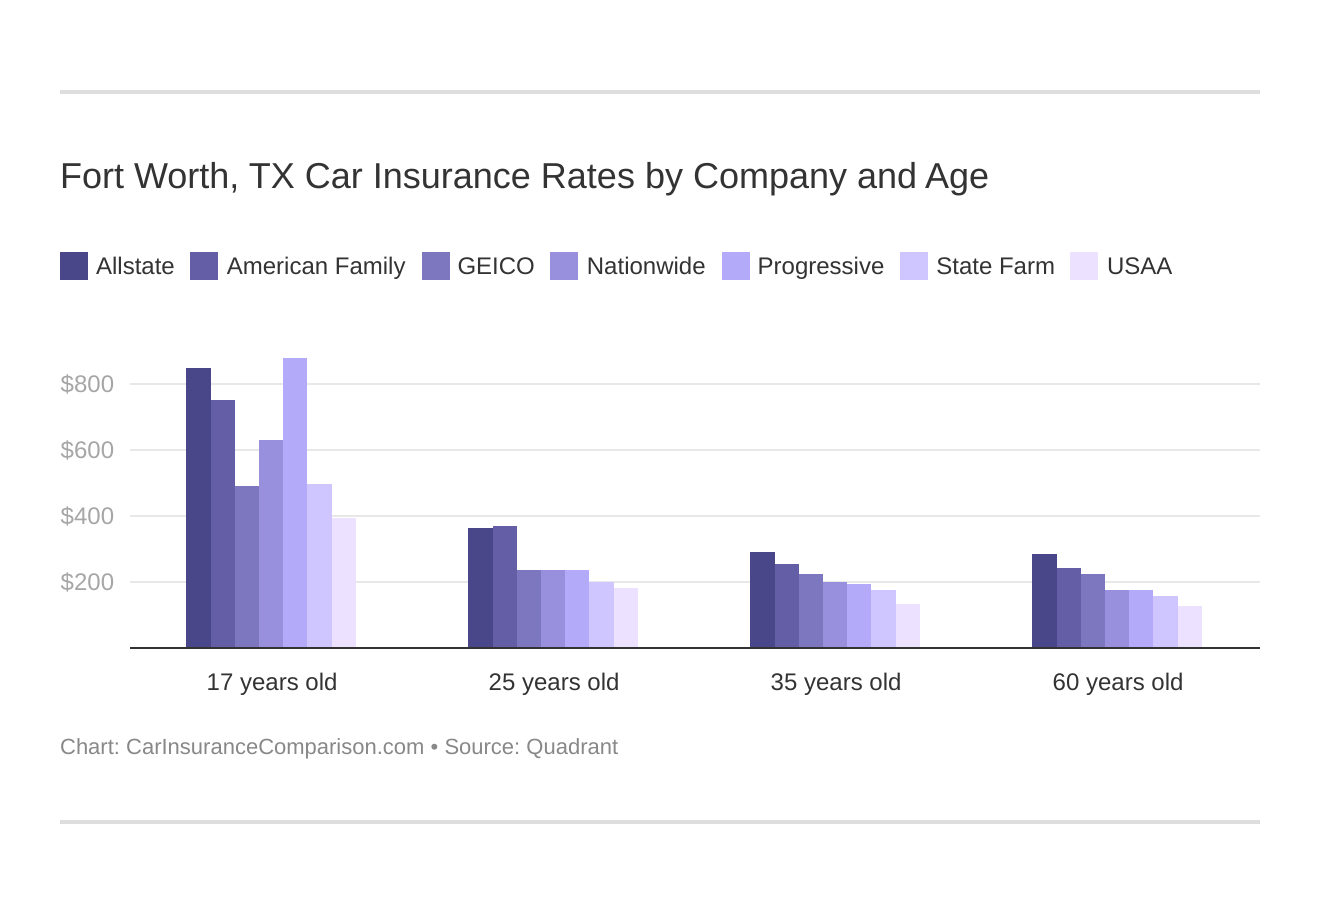 Fort Worth, TX Car Insurance Rates by Company and Age